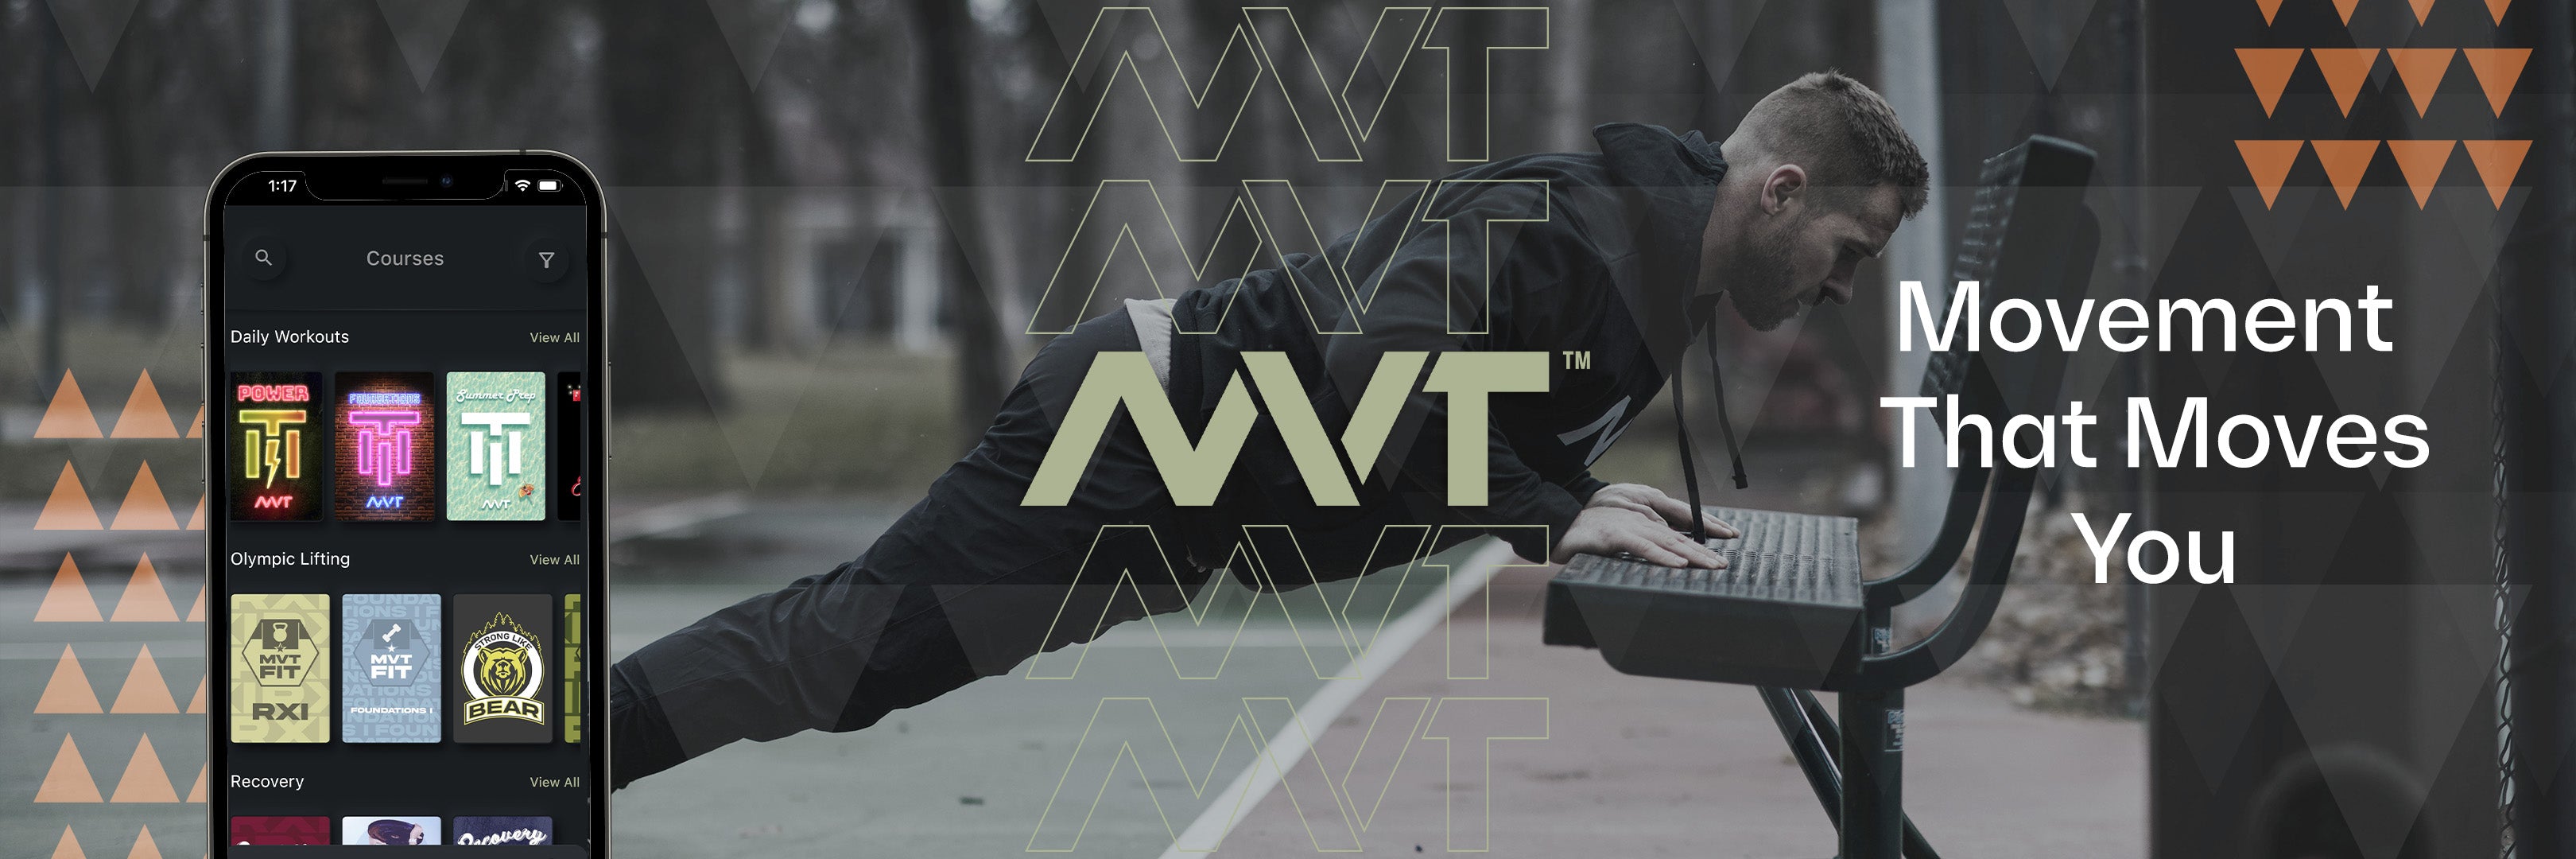 MVT Fitness App. Movement that moves you 